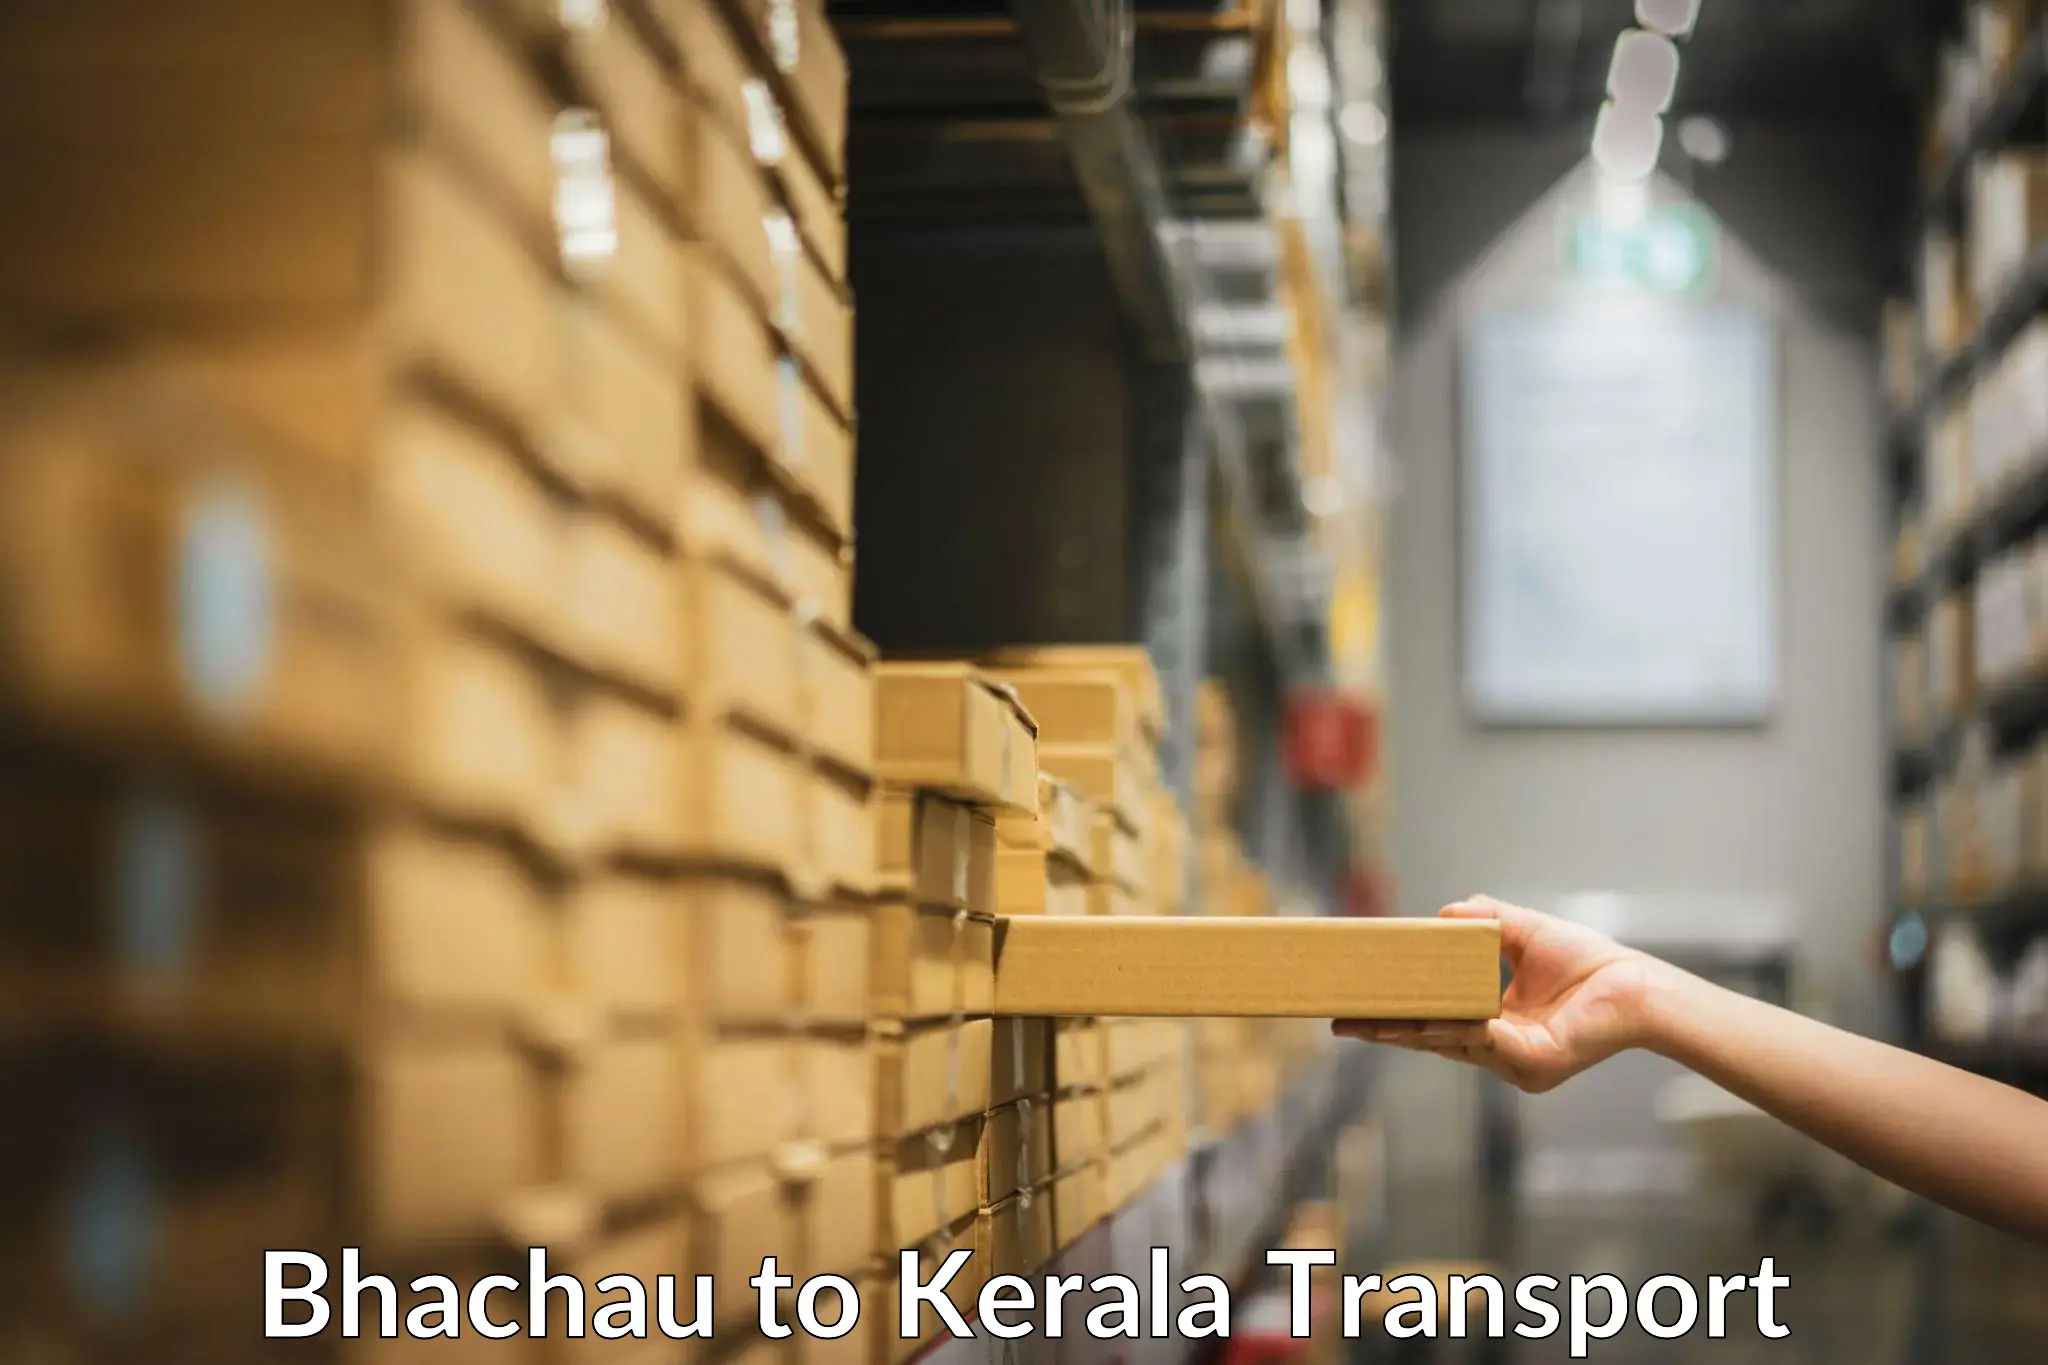 Transport bike from one state to another Bhachau to Cochin Port Kochi